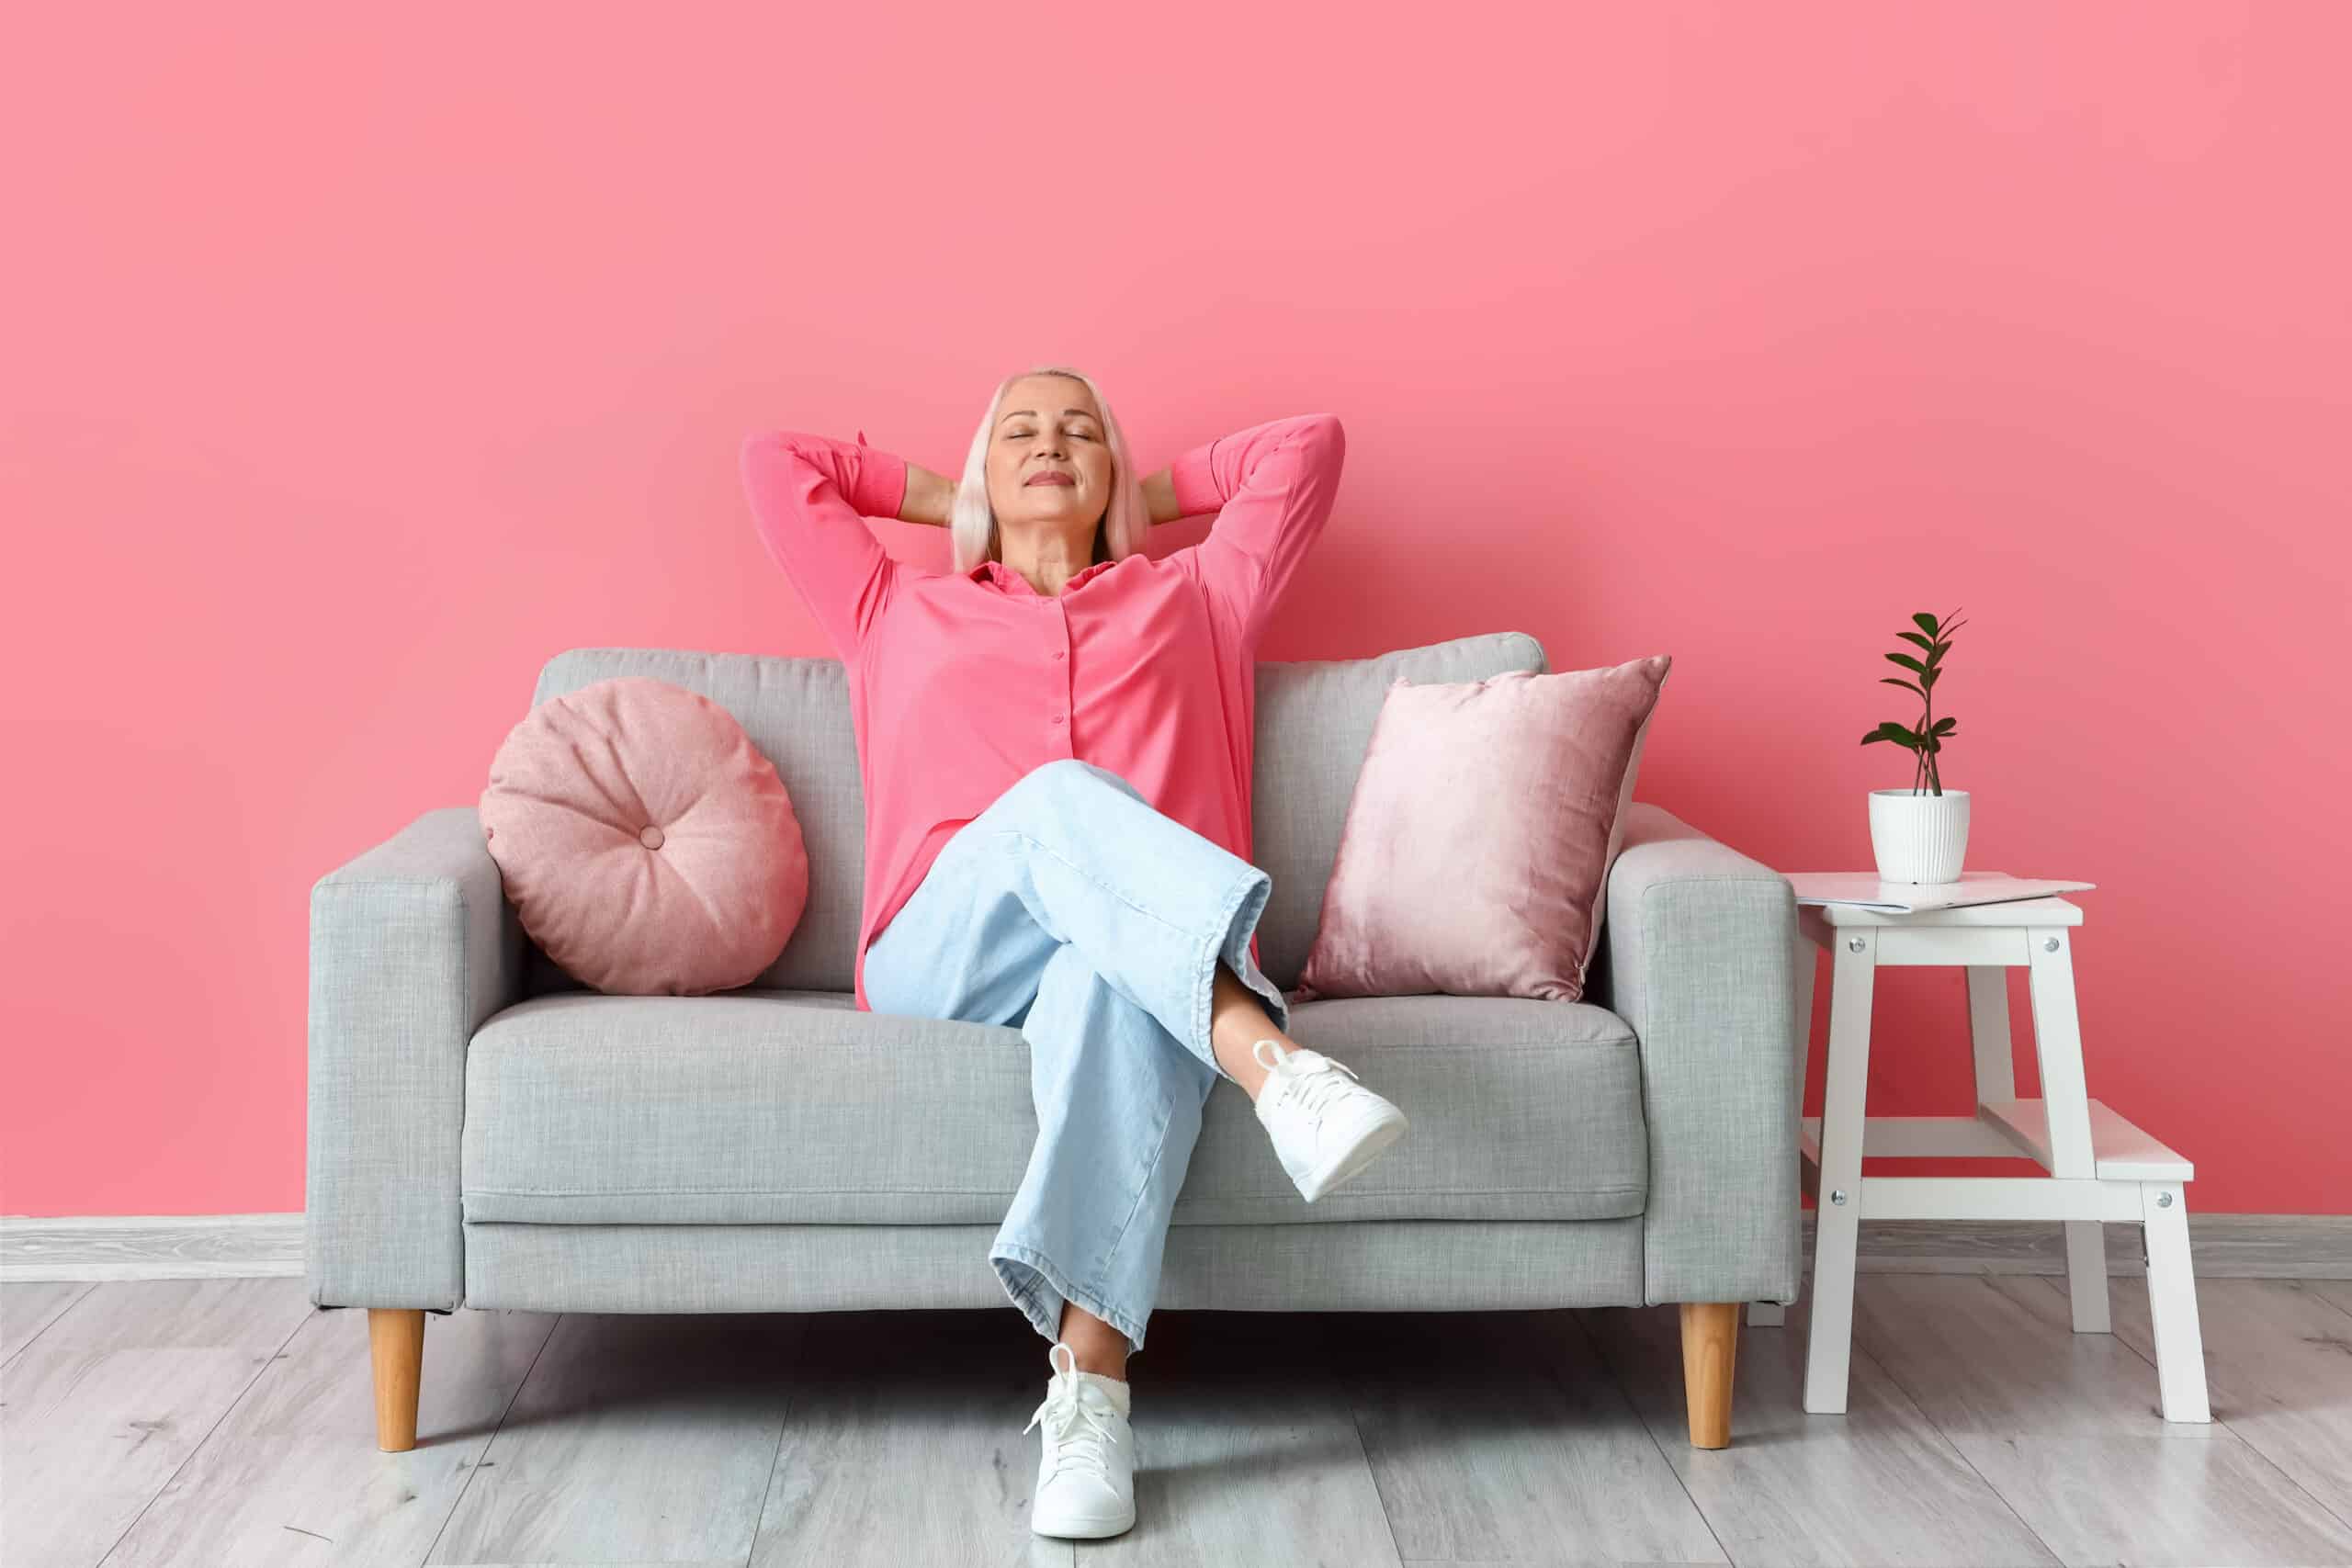 Mature woman relaxing on a gray couch in front of a pink wall.